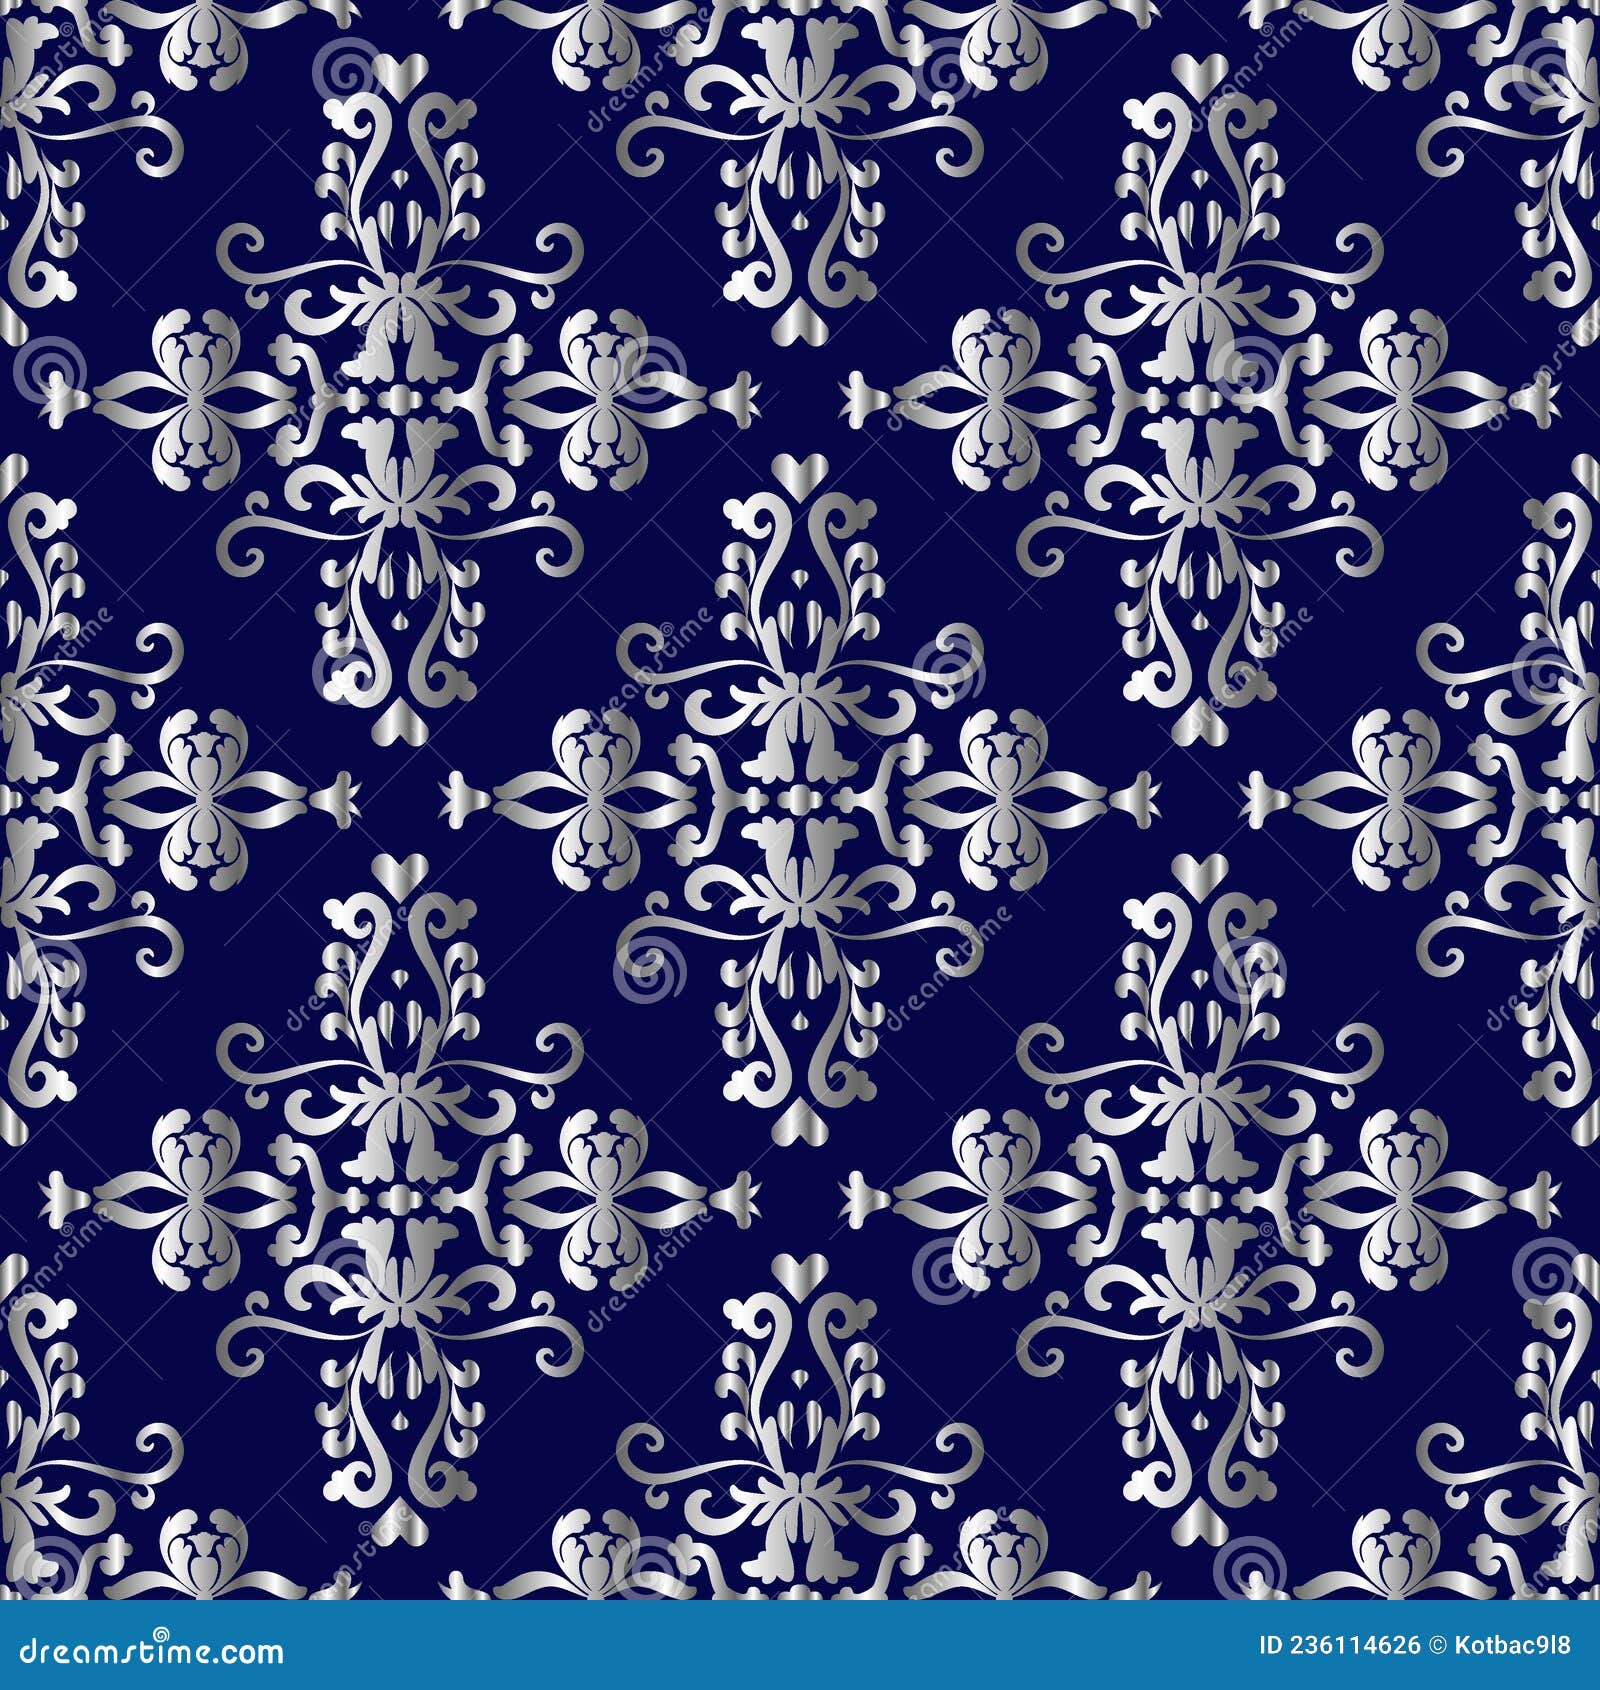 Silver Victorian Pattern on Navy Blue Background. Stock Vector ...